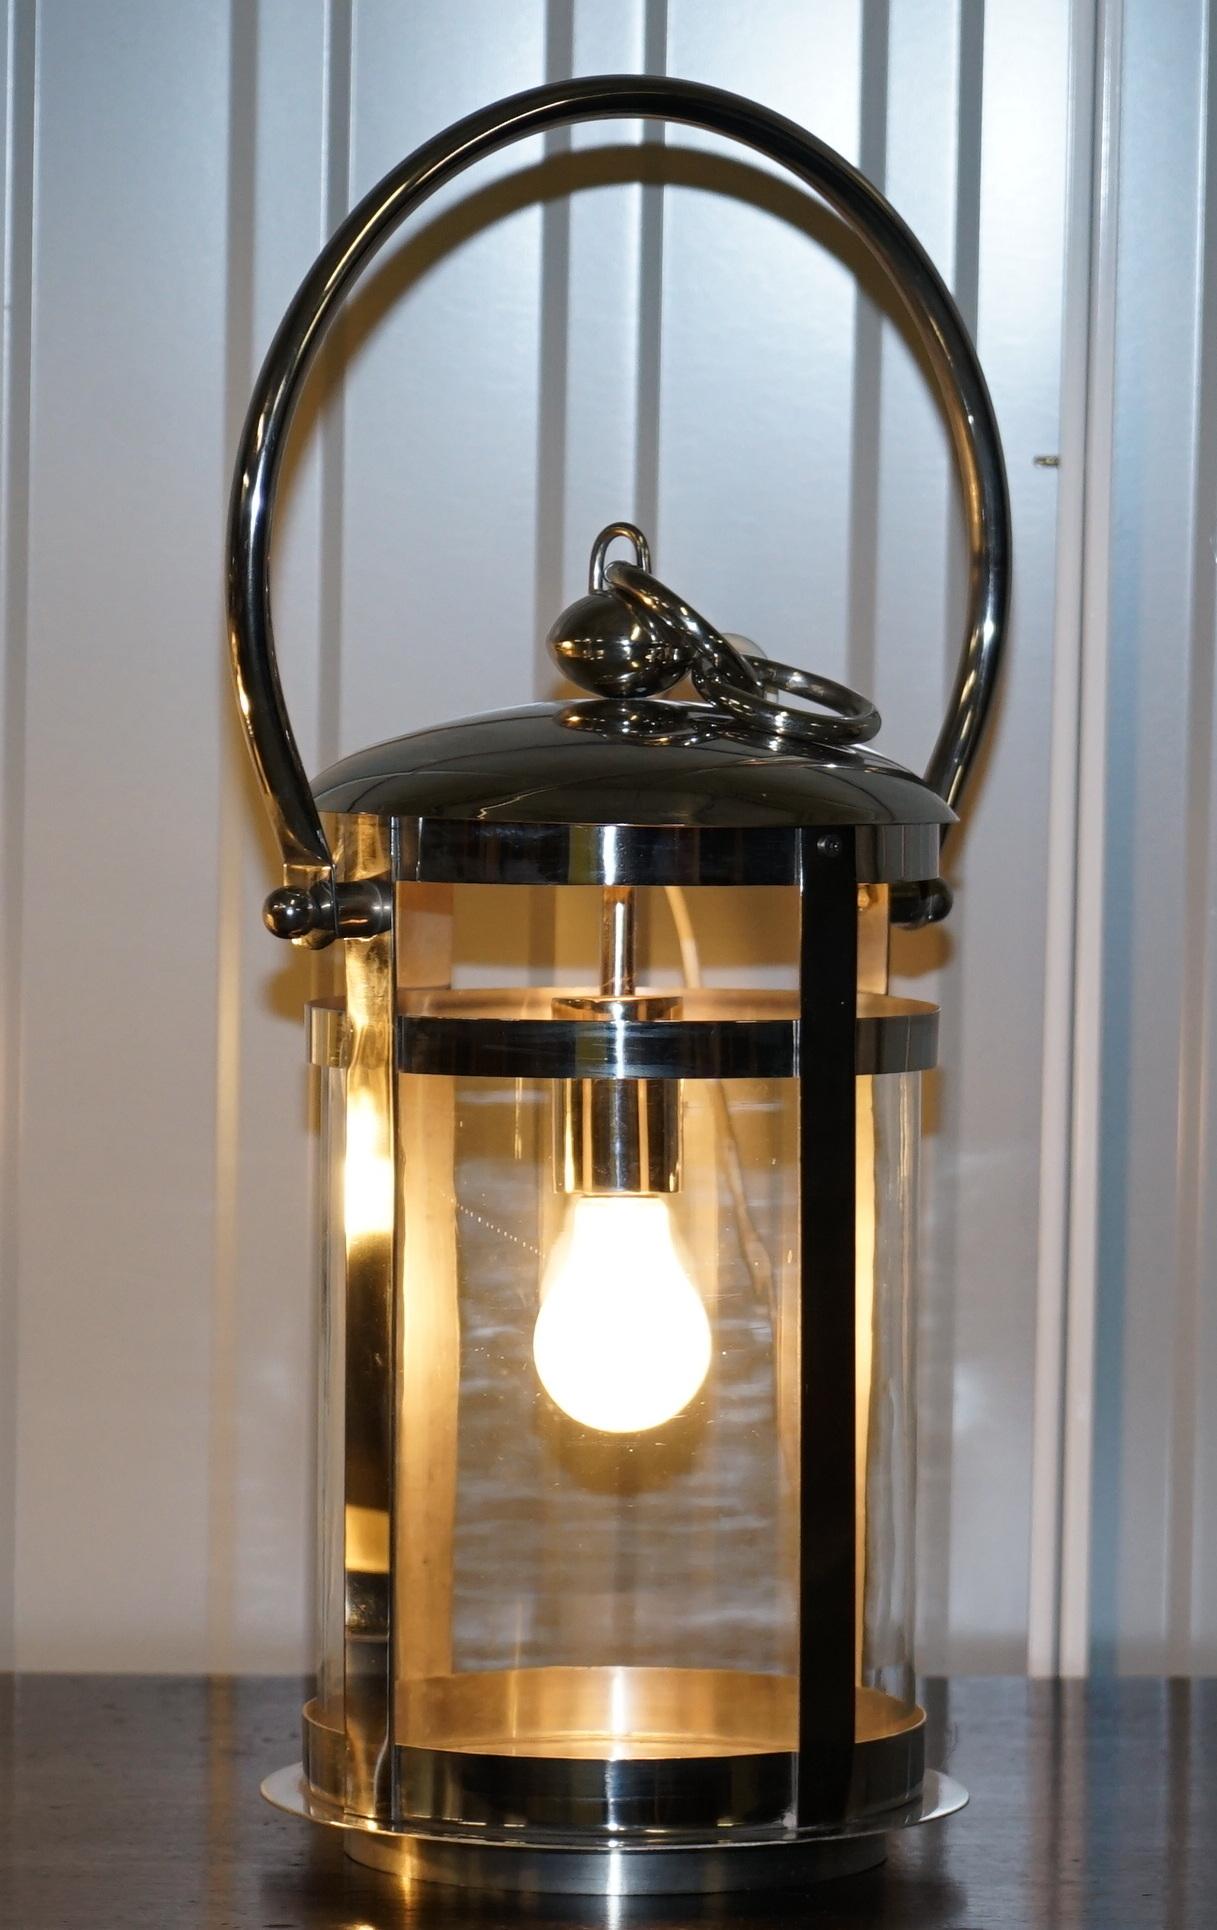 We are delighted to offer for sale this stunning pair of very high end portable luminaire chrome with duel cylindrical glass shades hanging lanterns

They are an exceptional quality and very high end pair of lanterns made by the geniuses at